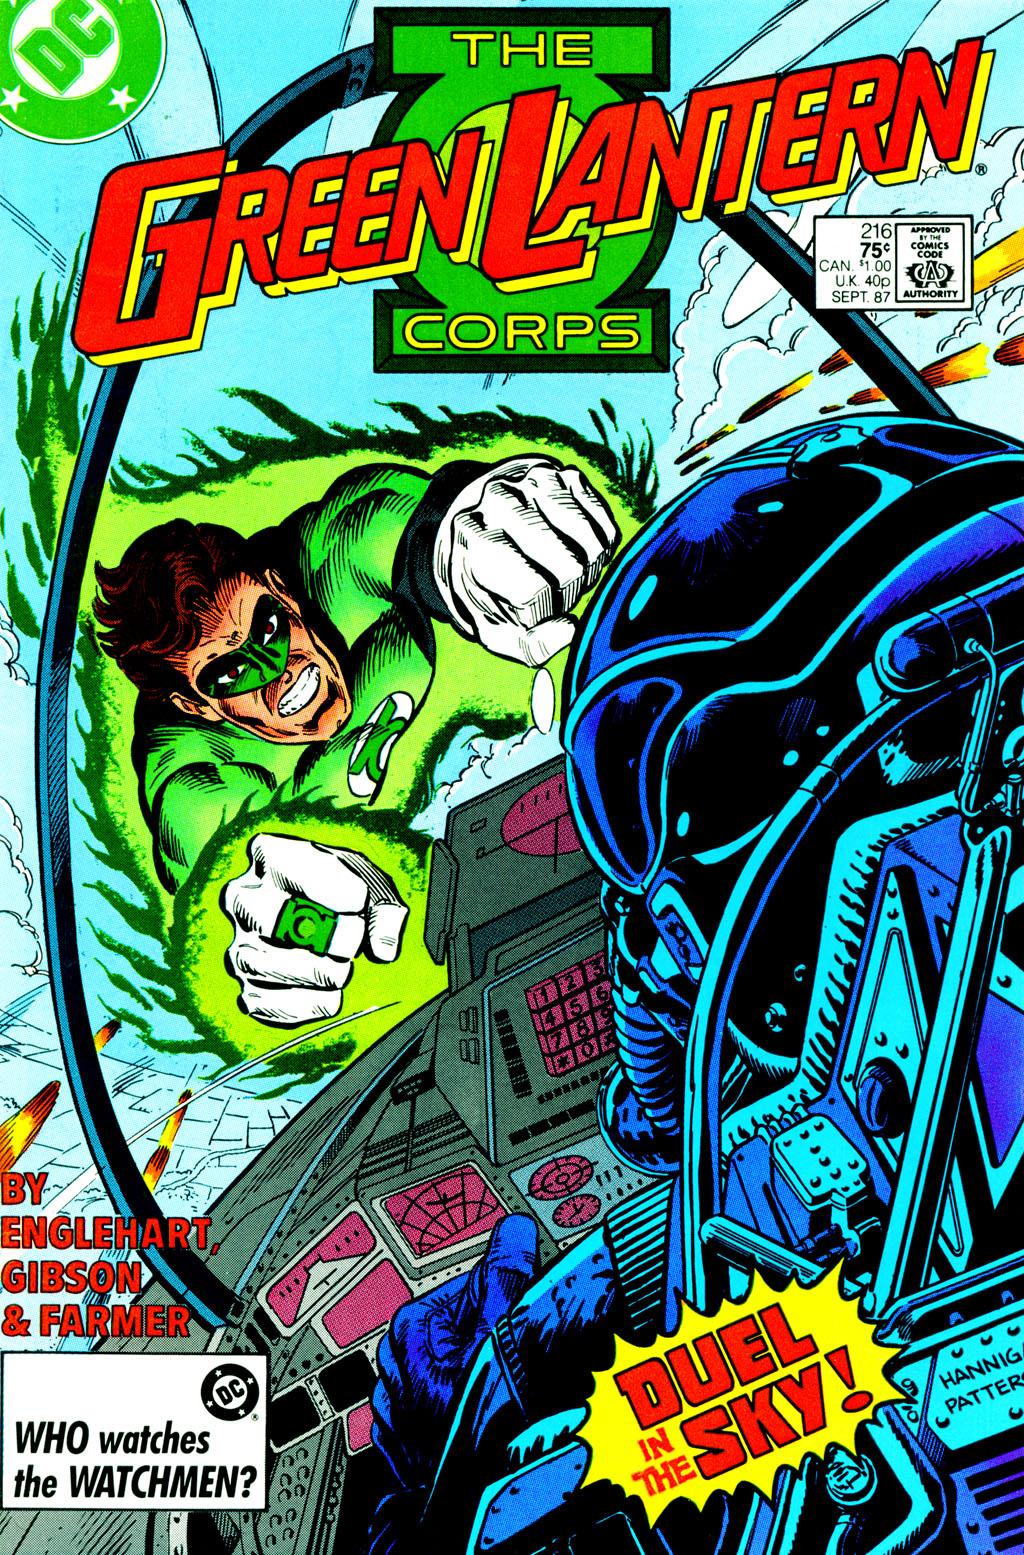 Read online The Green Lantern Corps comic -  Issue #216 - 1